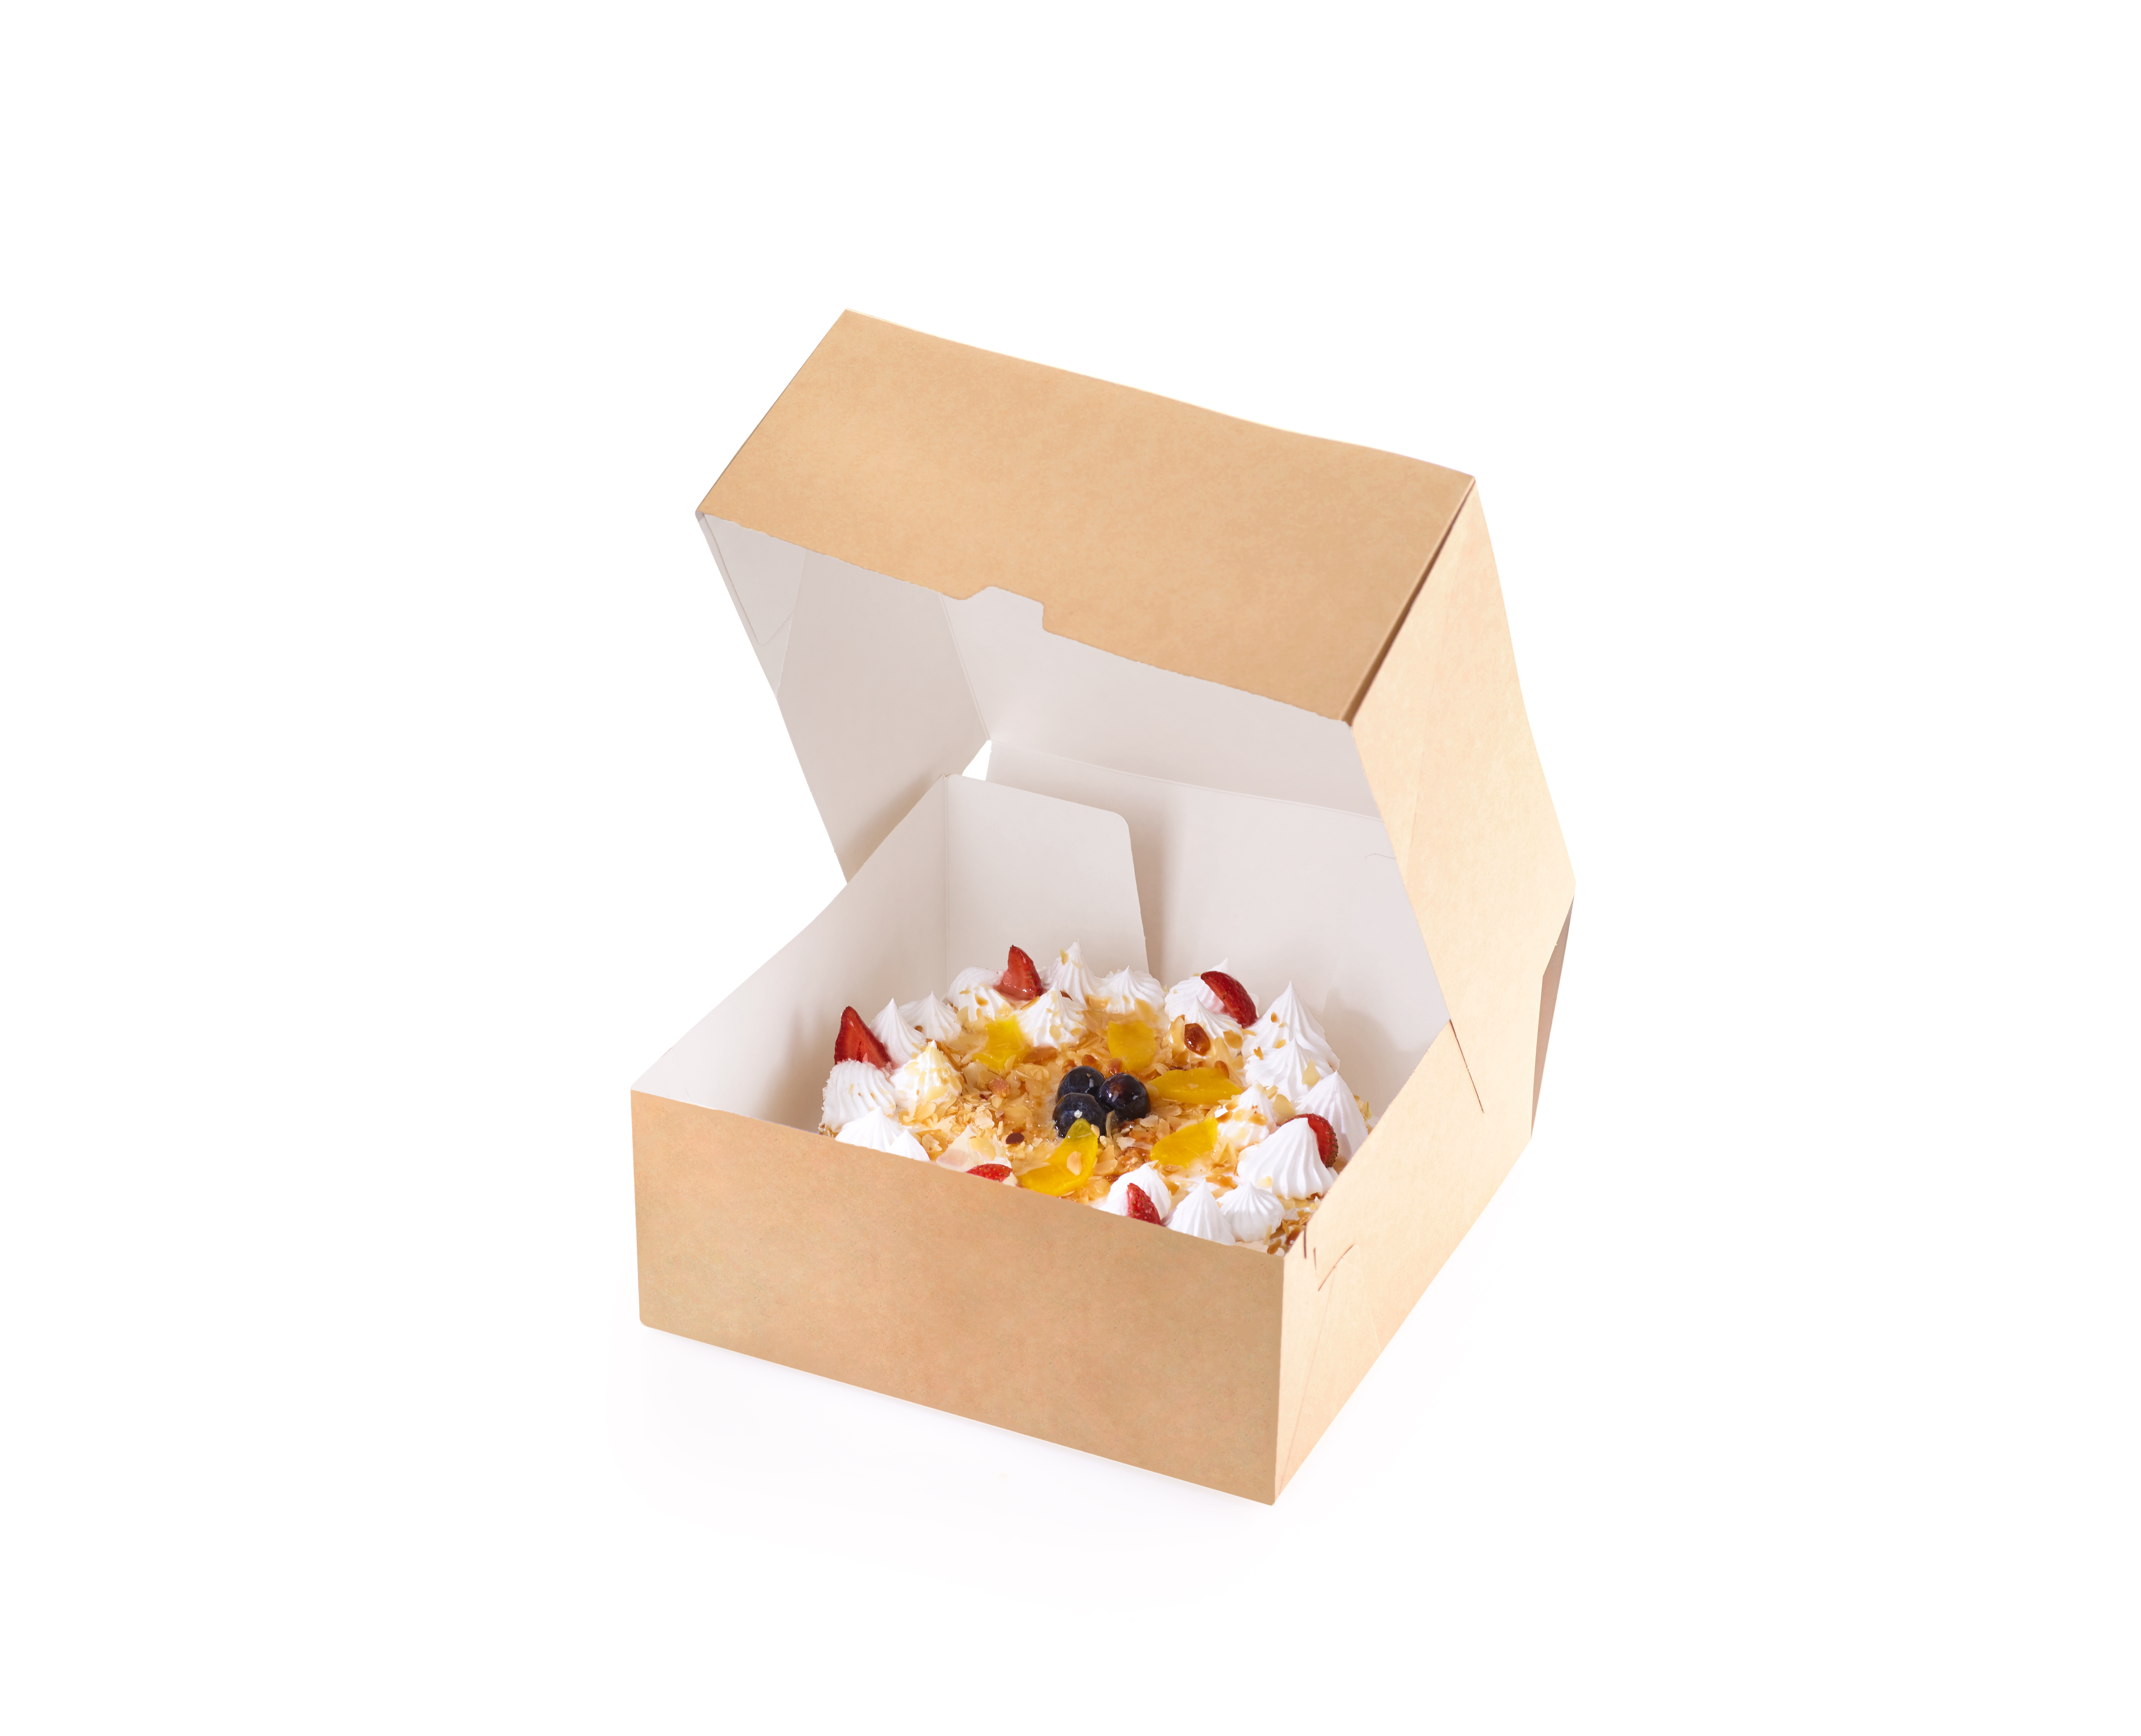 OSQ CAKE 1900 packaging for desserts